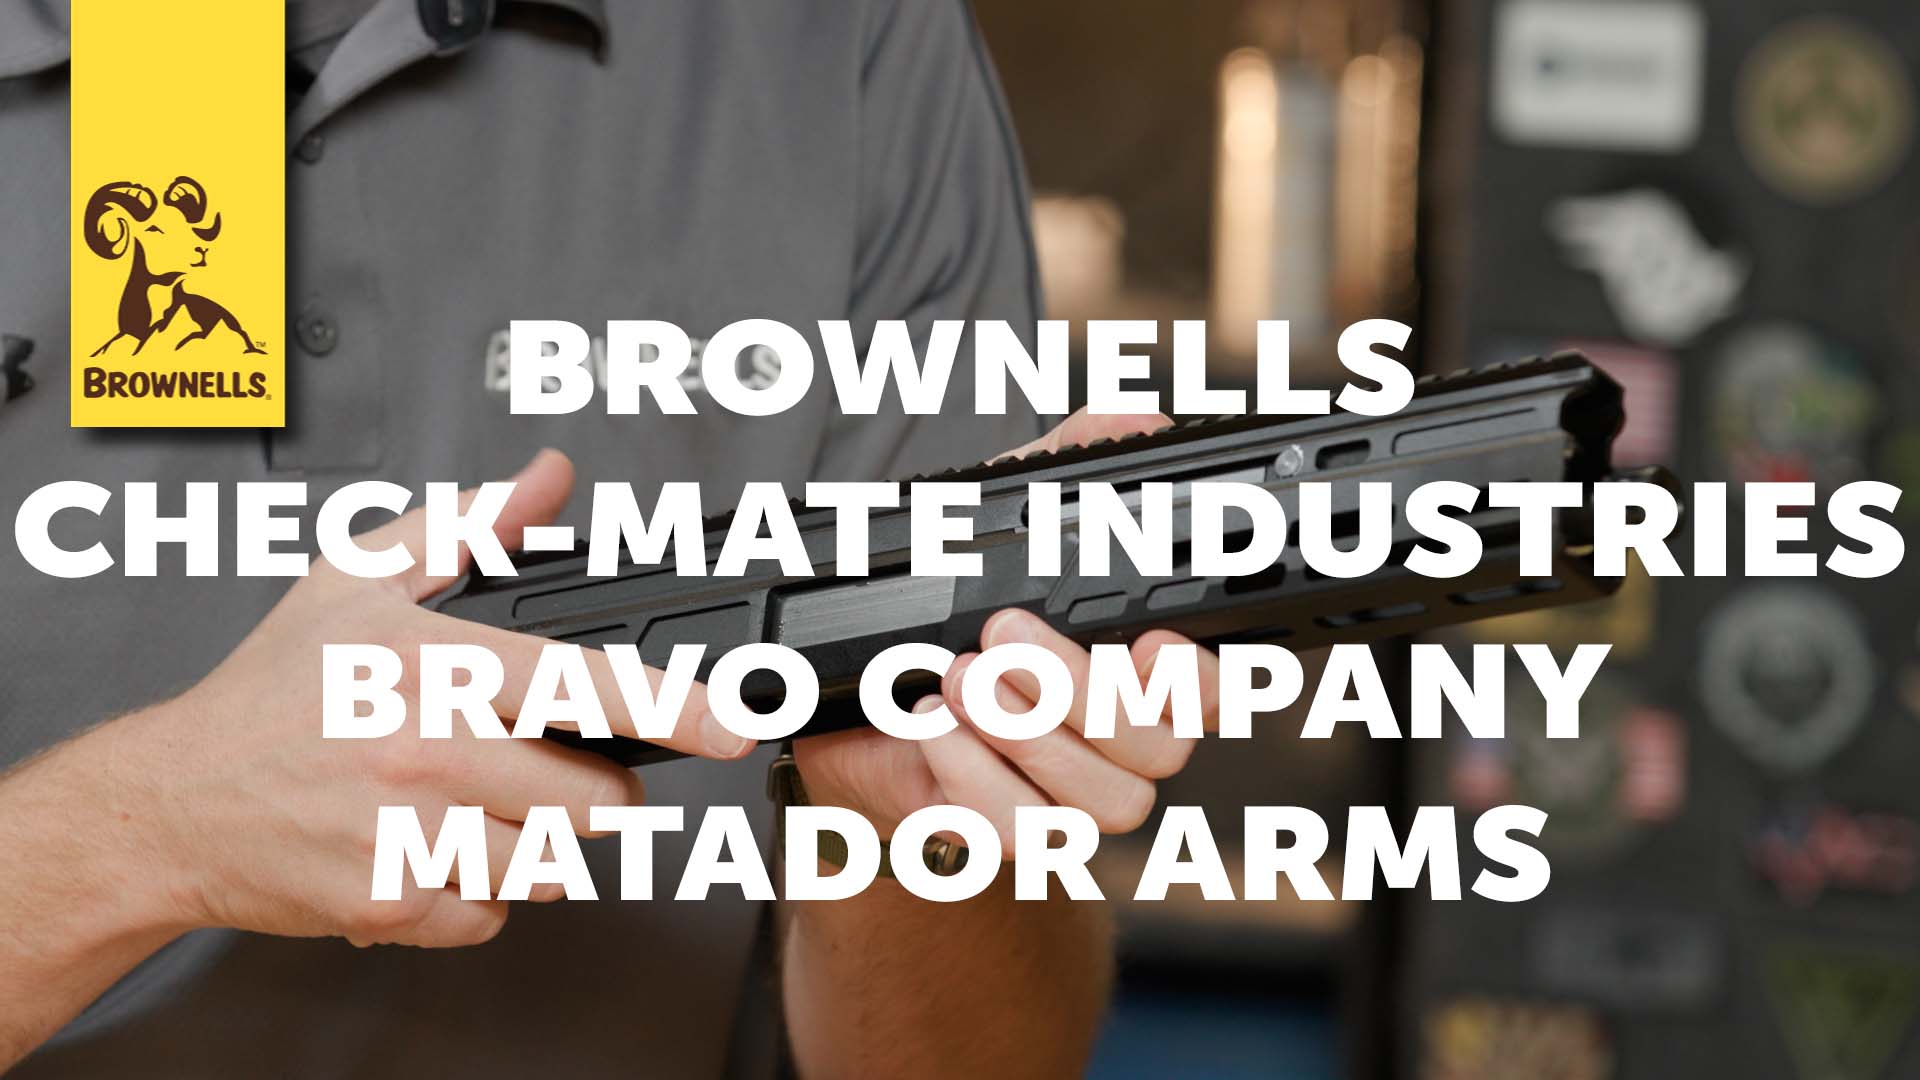 New Products: Check-Mate Industries, Bravo Company, Matador Arms